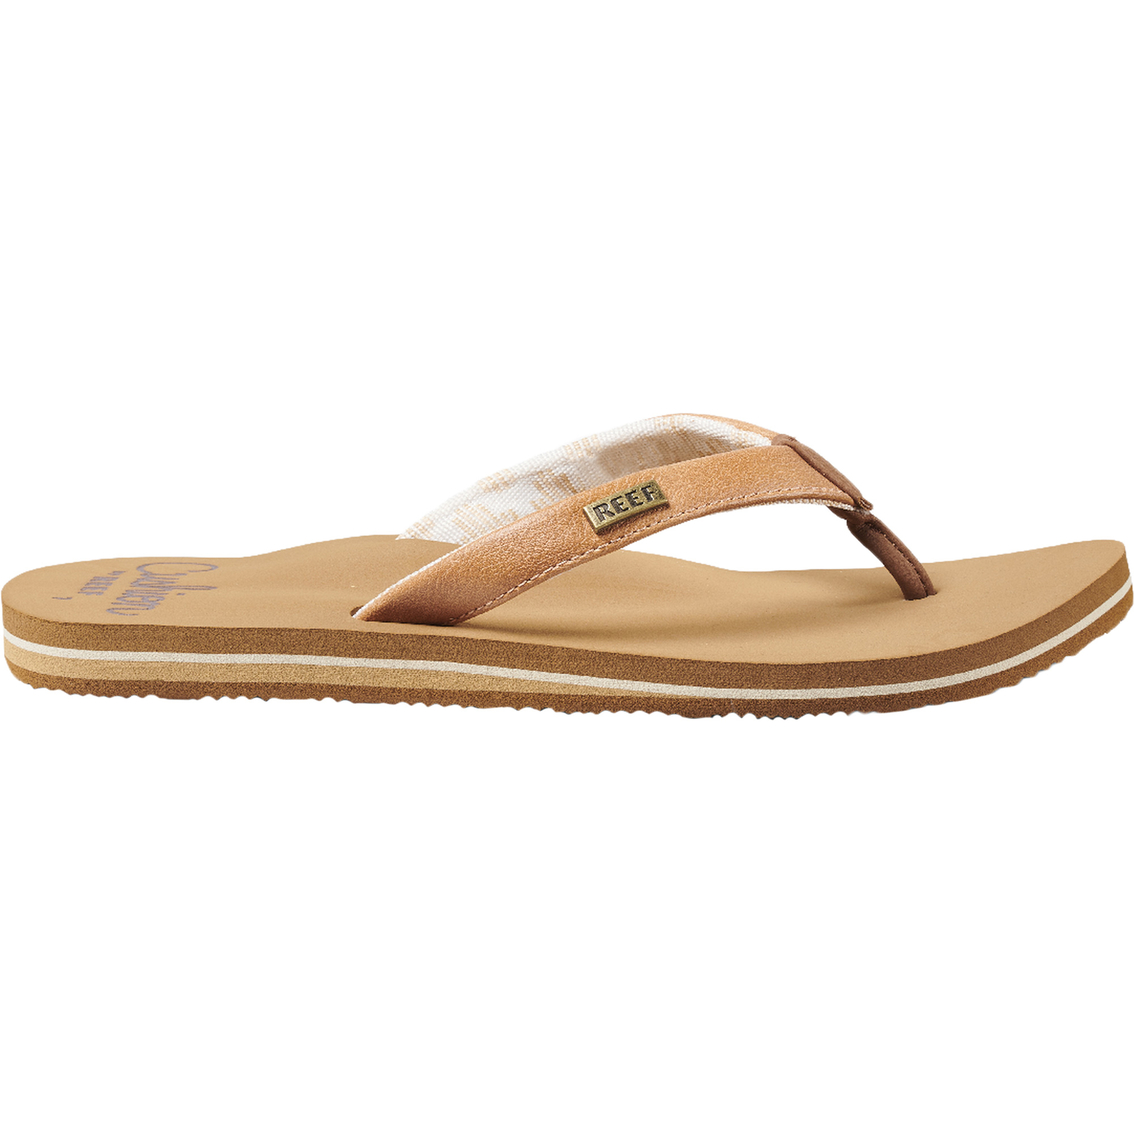 Reef Women's Cushion Sands Sandals - Image 2 of 4